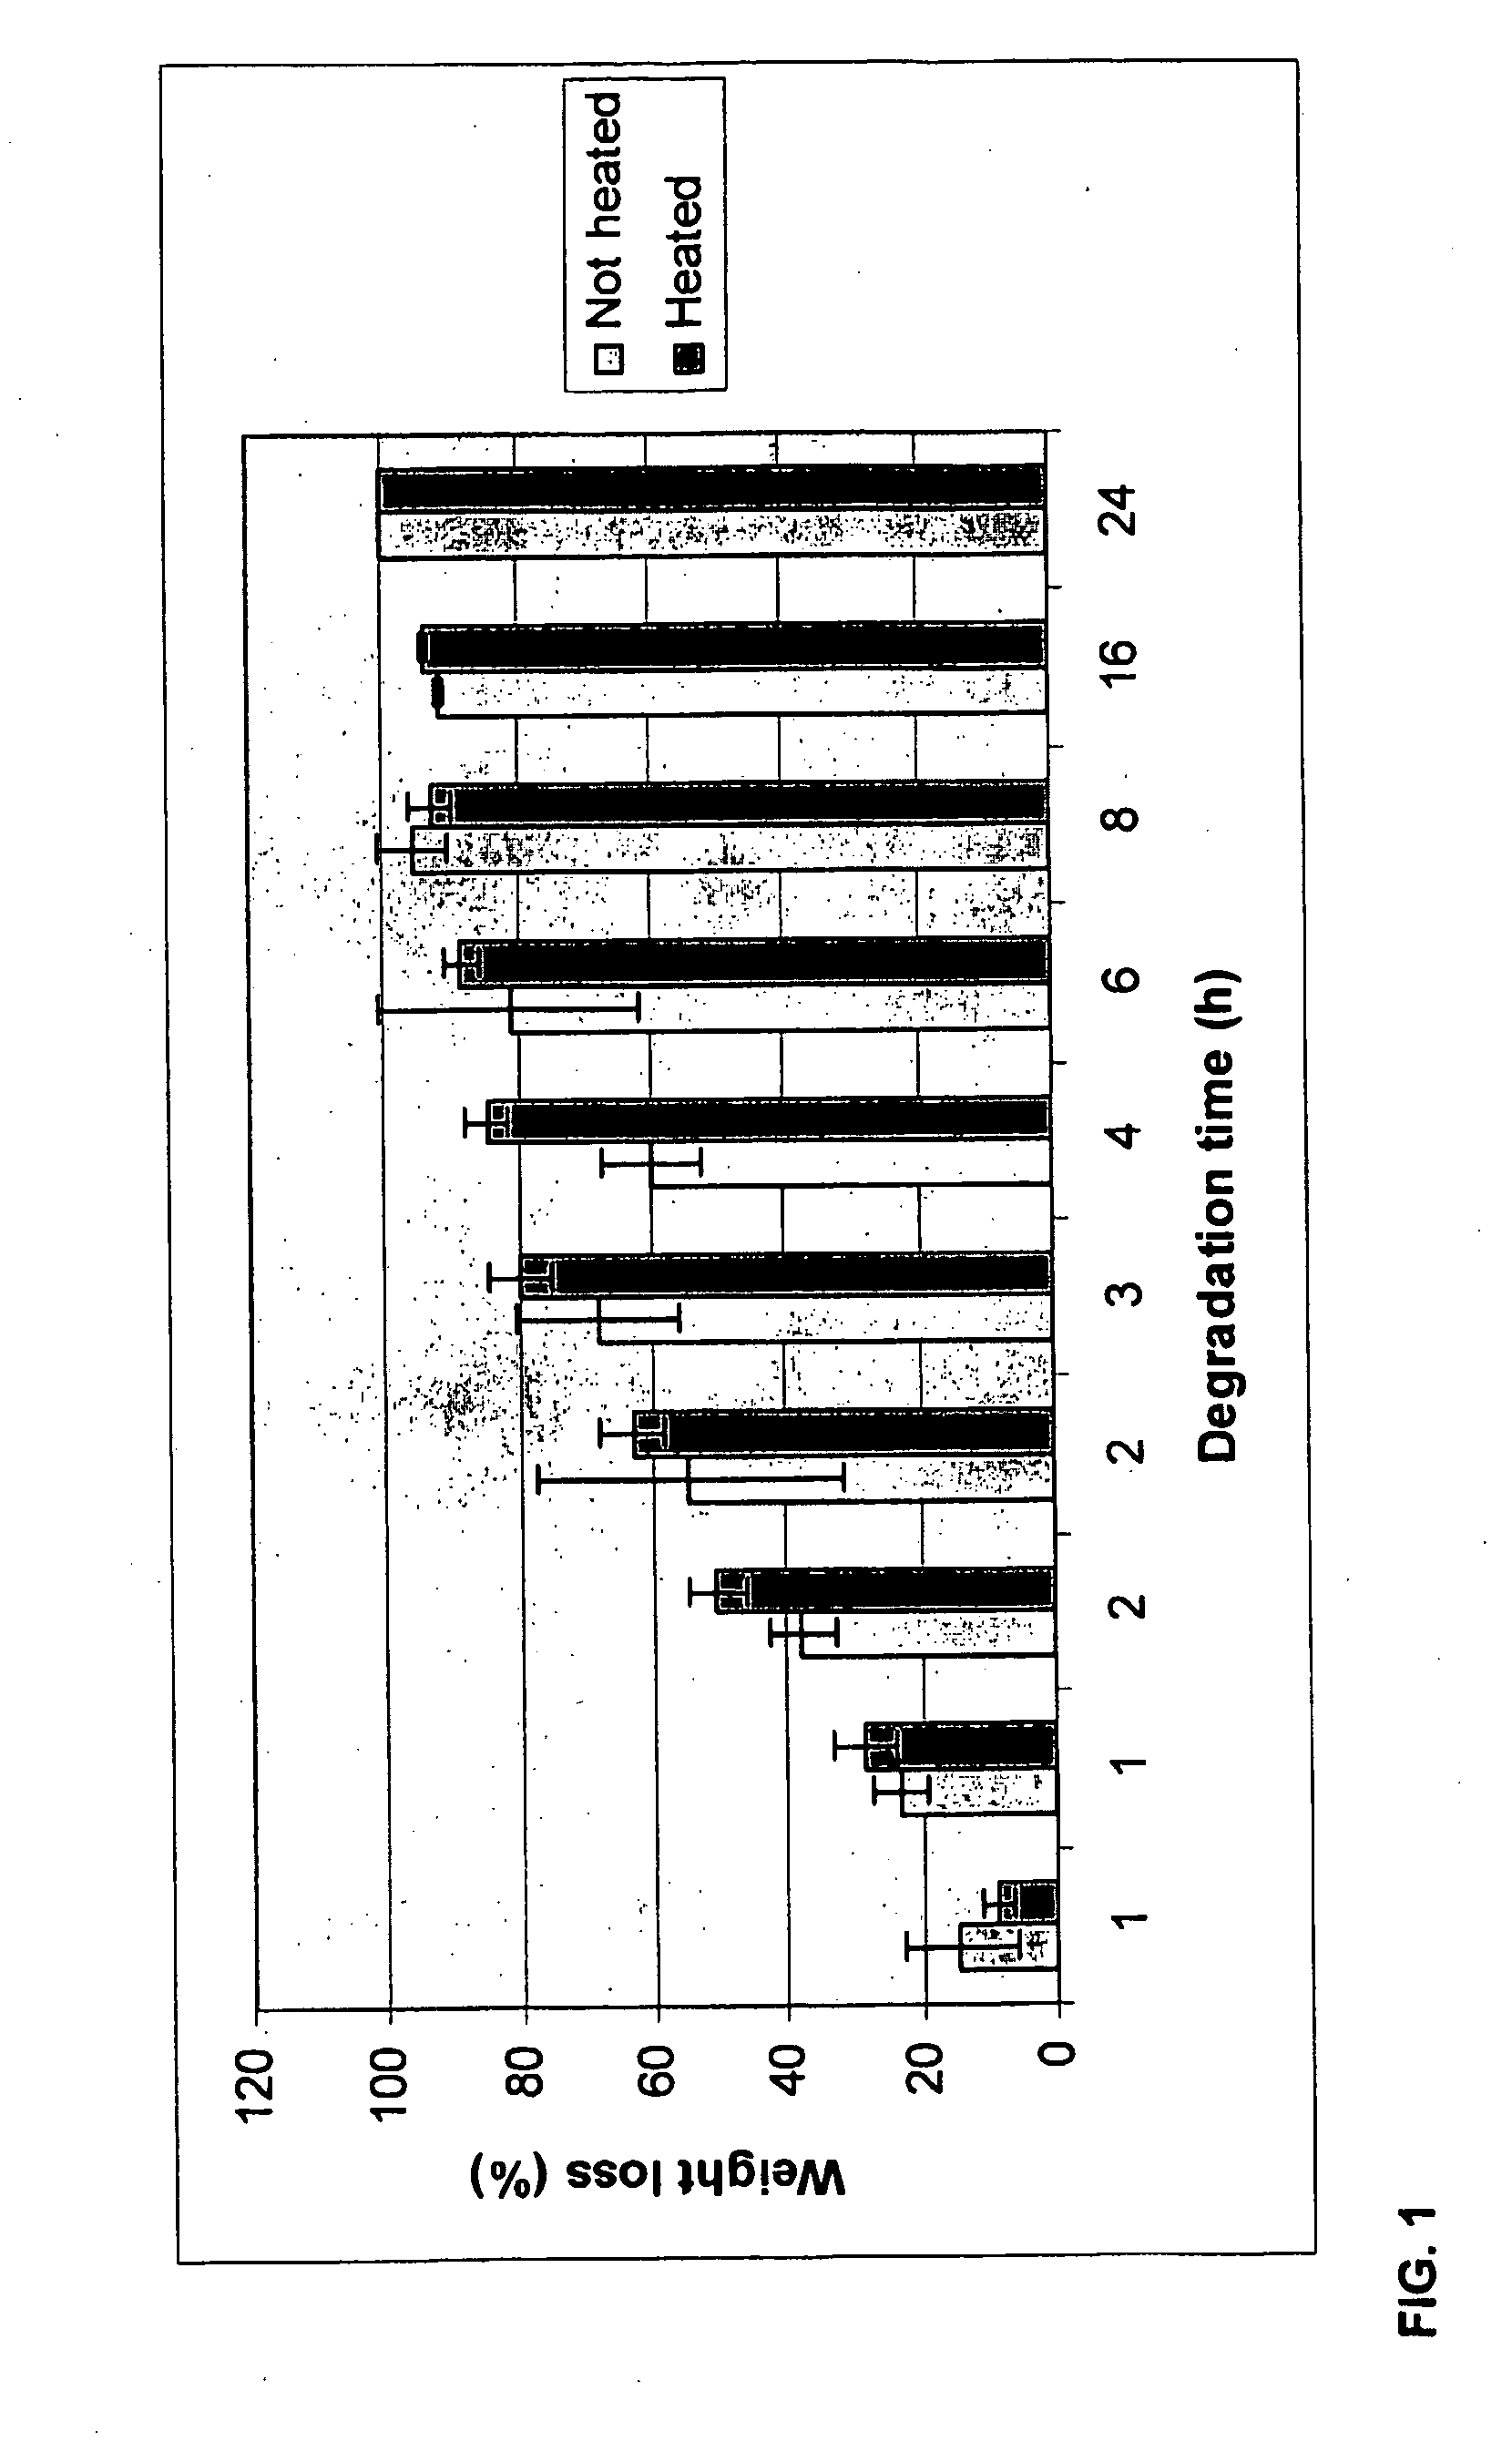 Method of cross-linking hyaluronic acid with divinulsulfone